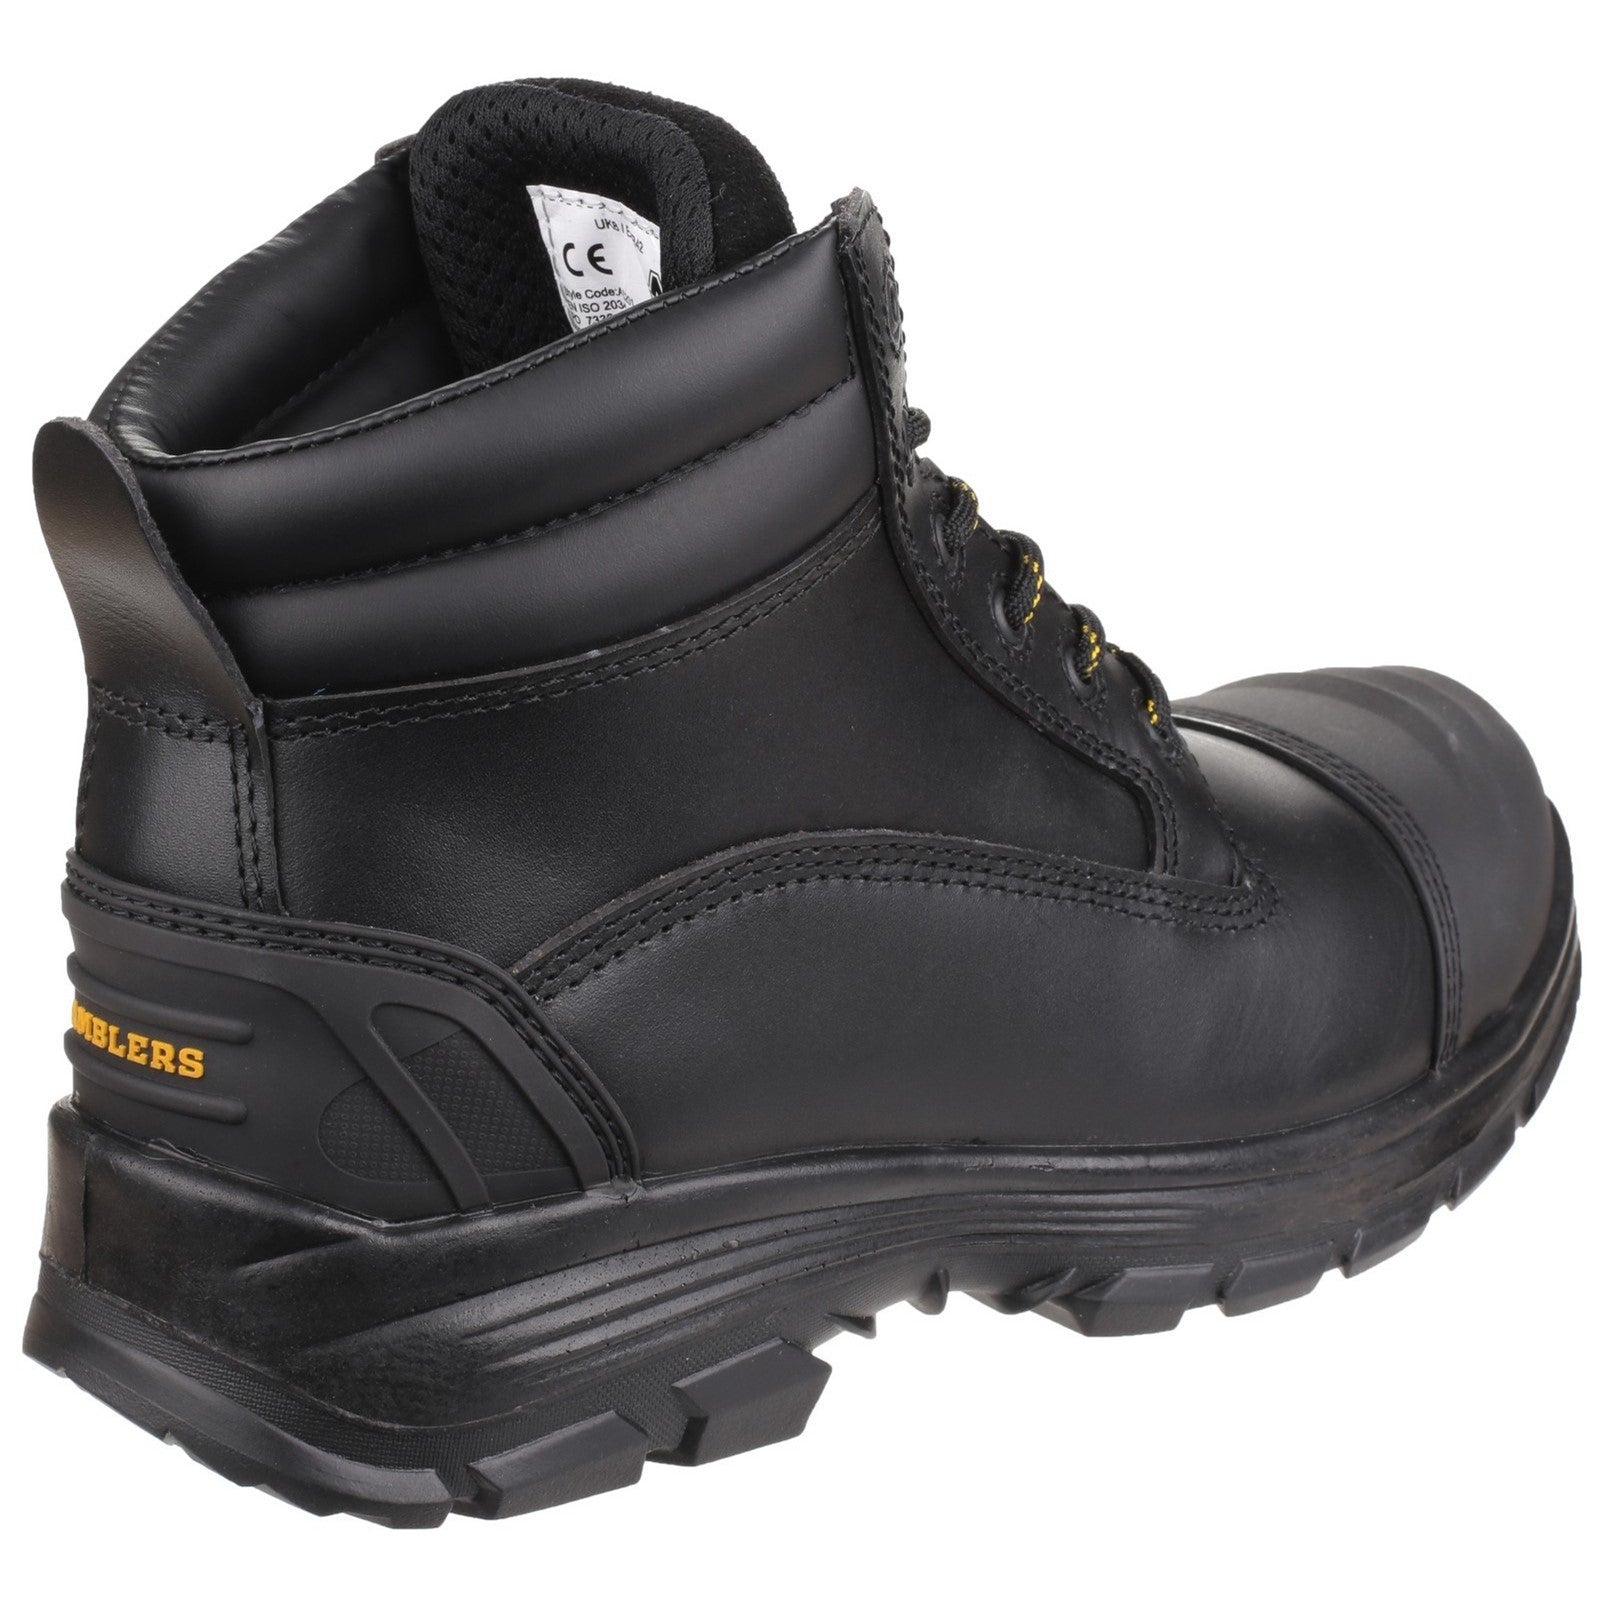 Amblers AS201 QUANTOK S3 PU/RUBBER SAFETY BOOT